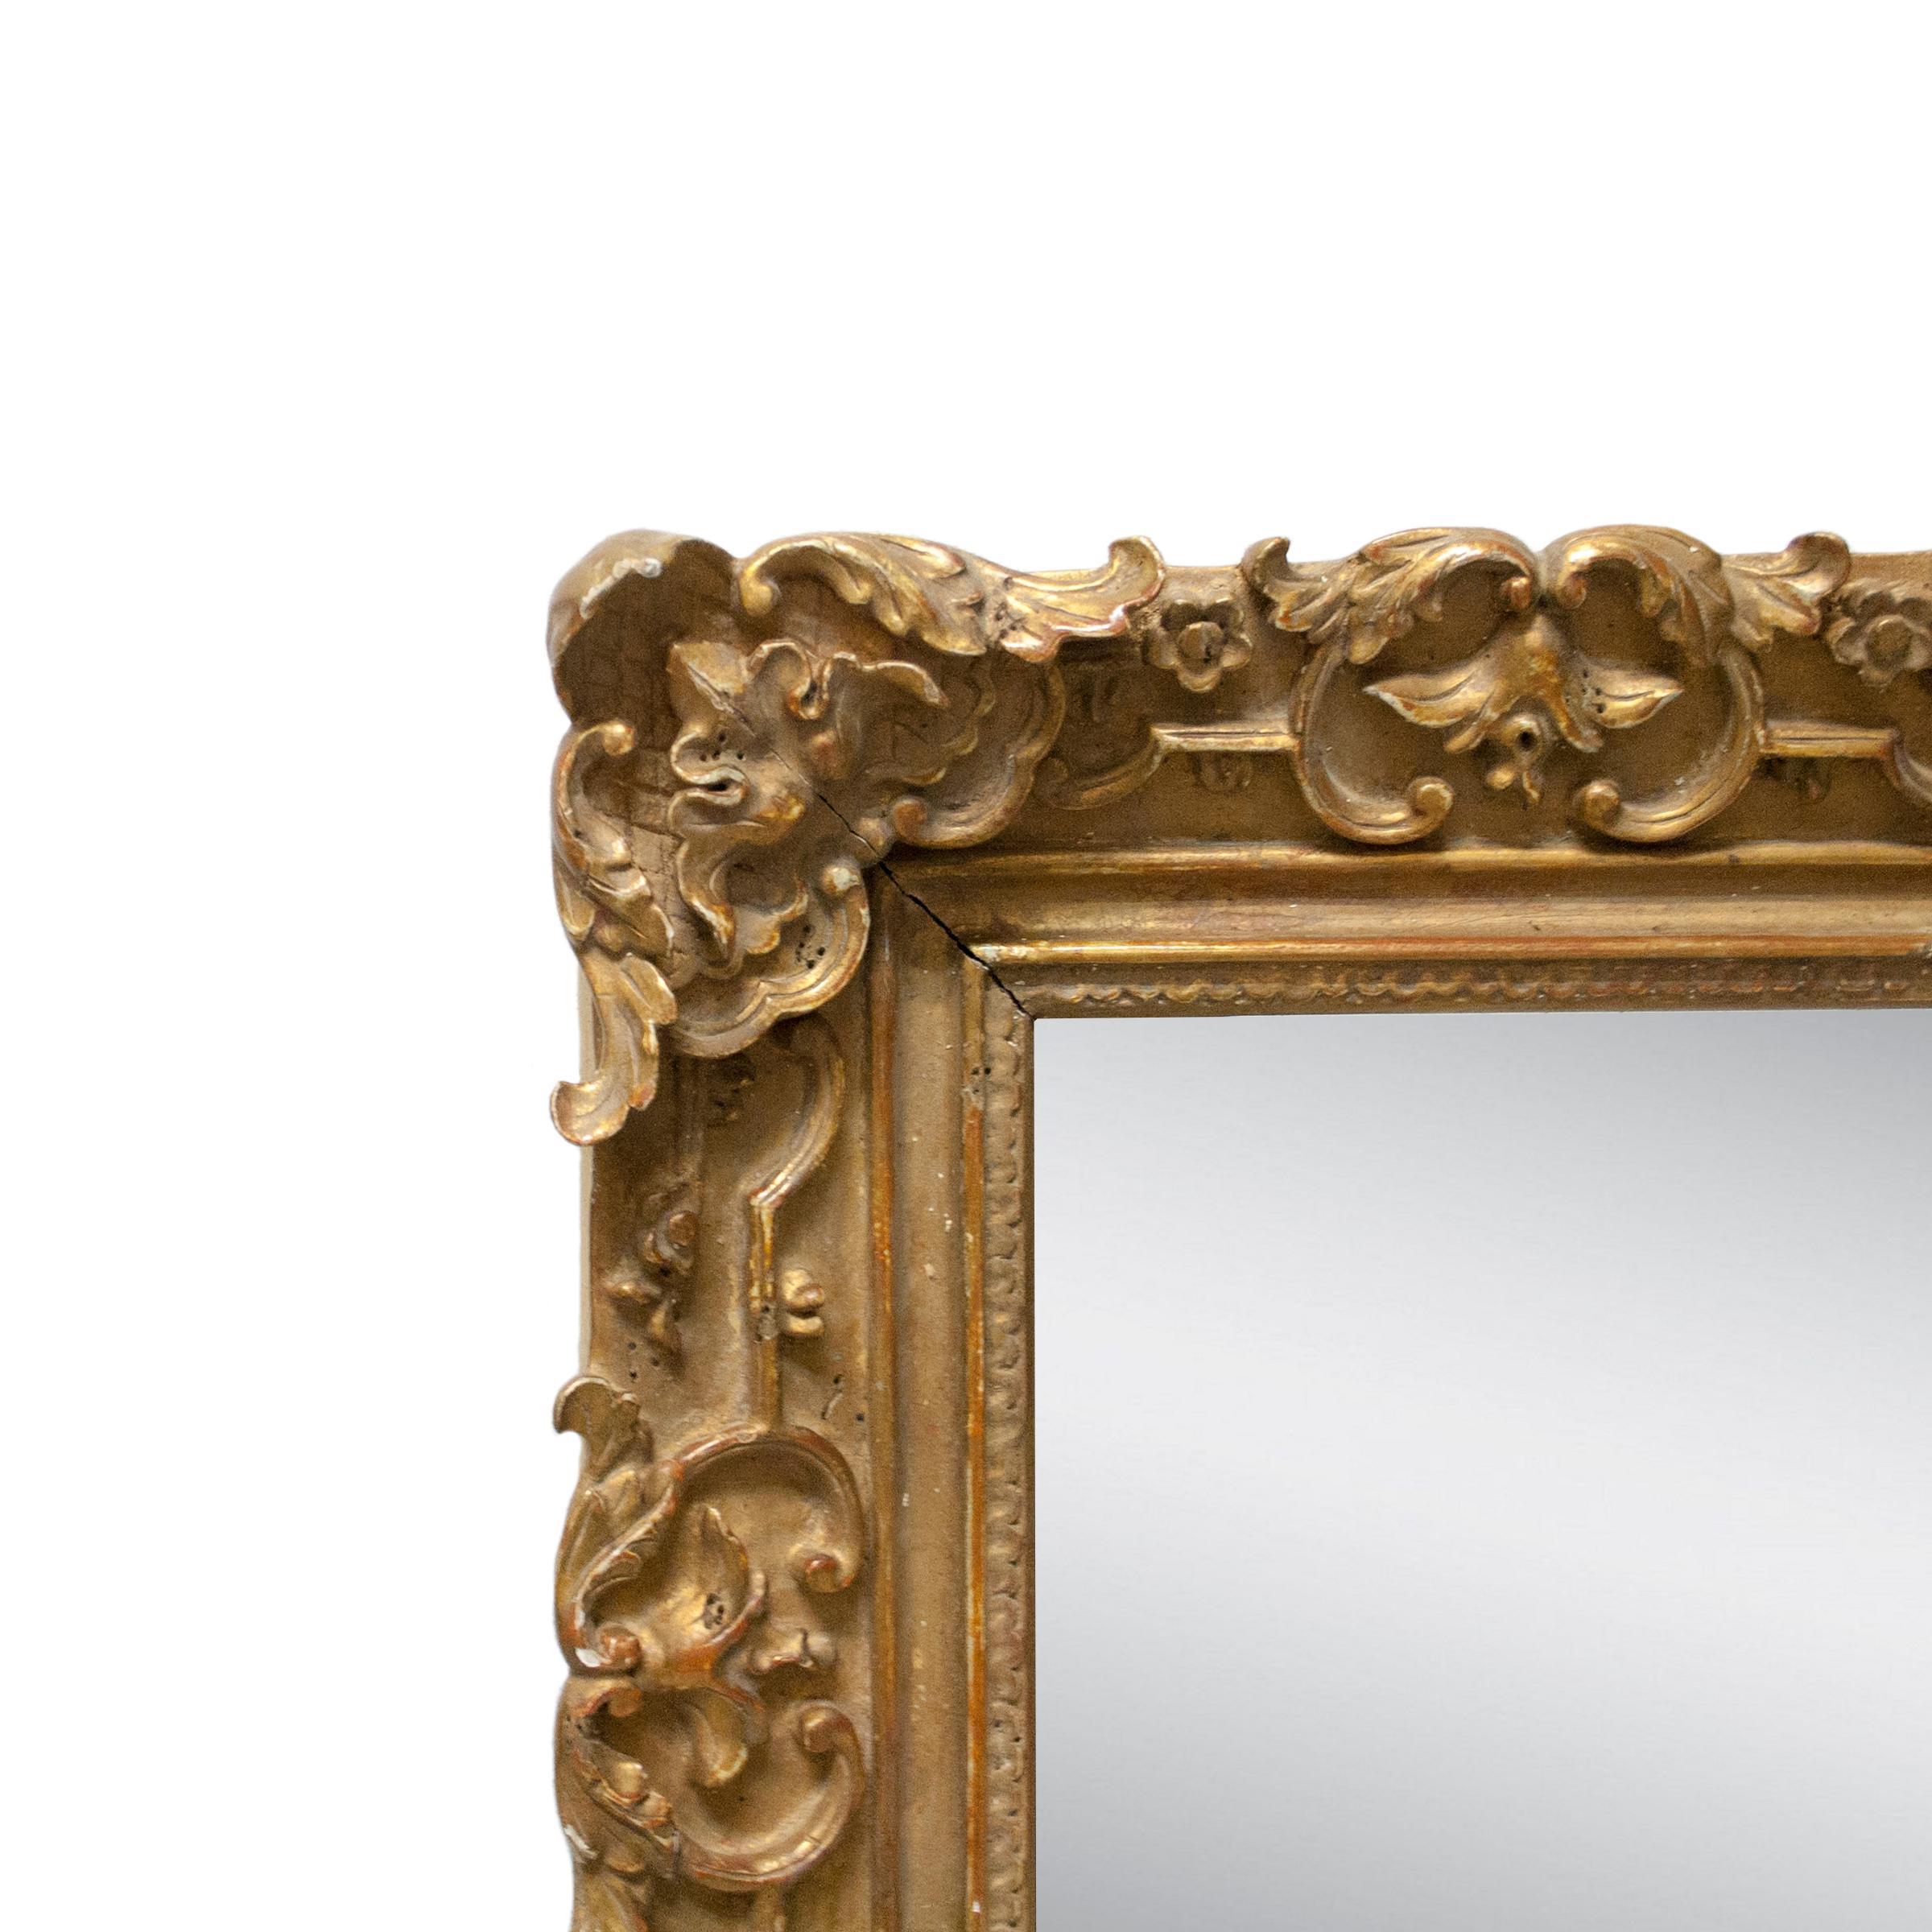 Neoclassical Revival Neoclassical Empire Rectangular Gold Hand Carved Wooden Mirror, Spain, 1970 For Sale